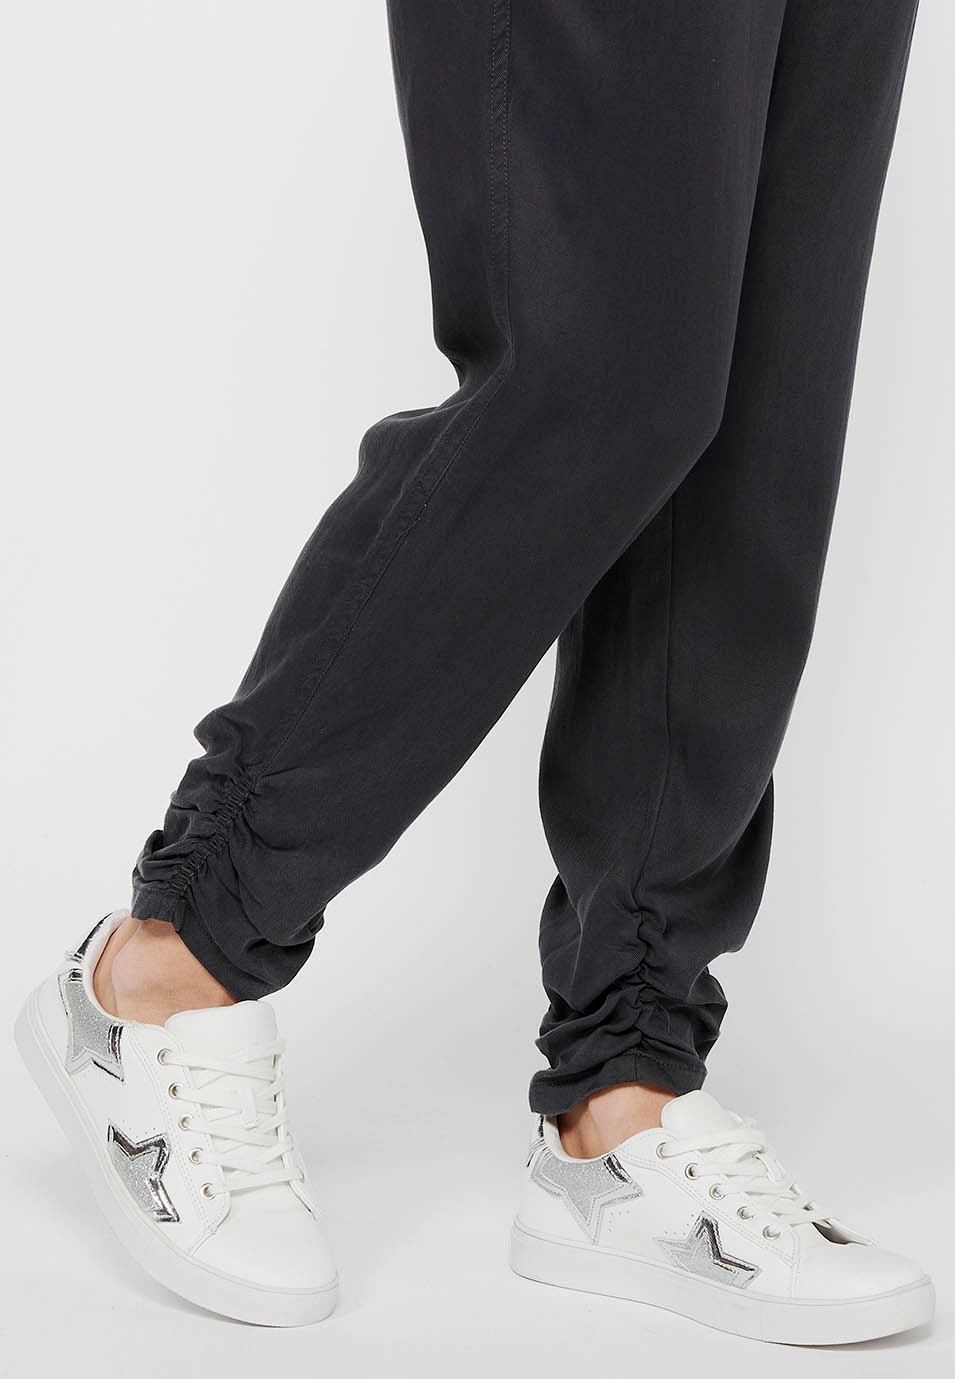 Long jogger pants with curled finish and rubberized waist with four pockets, two at the back with flap in Black for Women 9